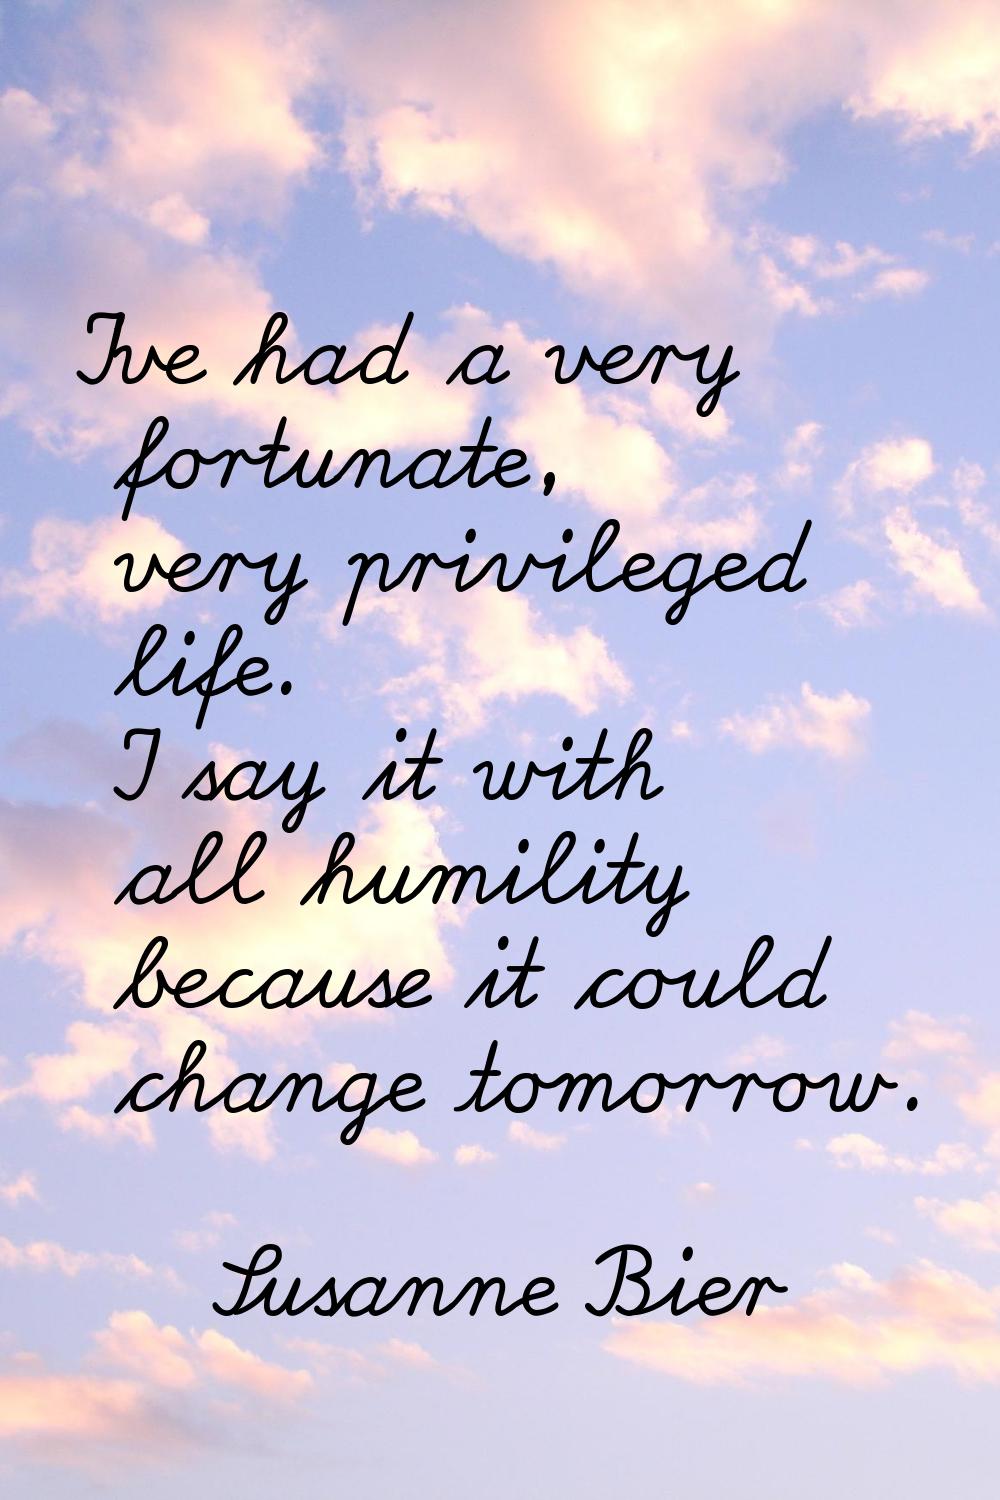 I've had a very fortunate, very privileged life. I say it with all humility because it could change